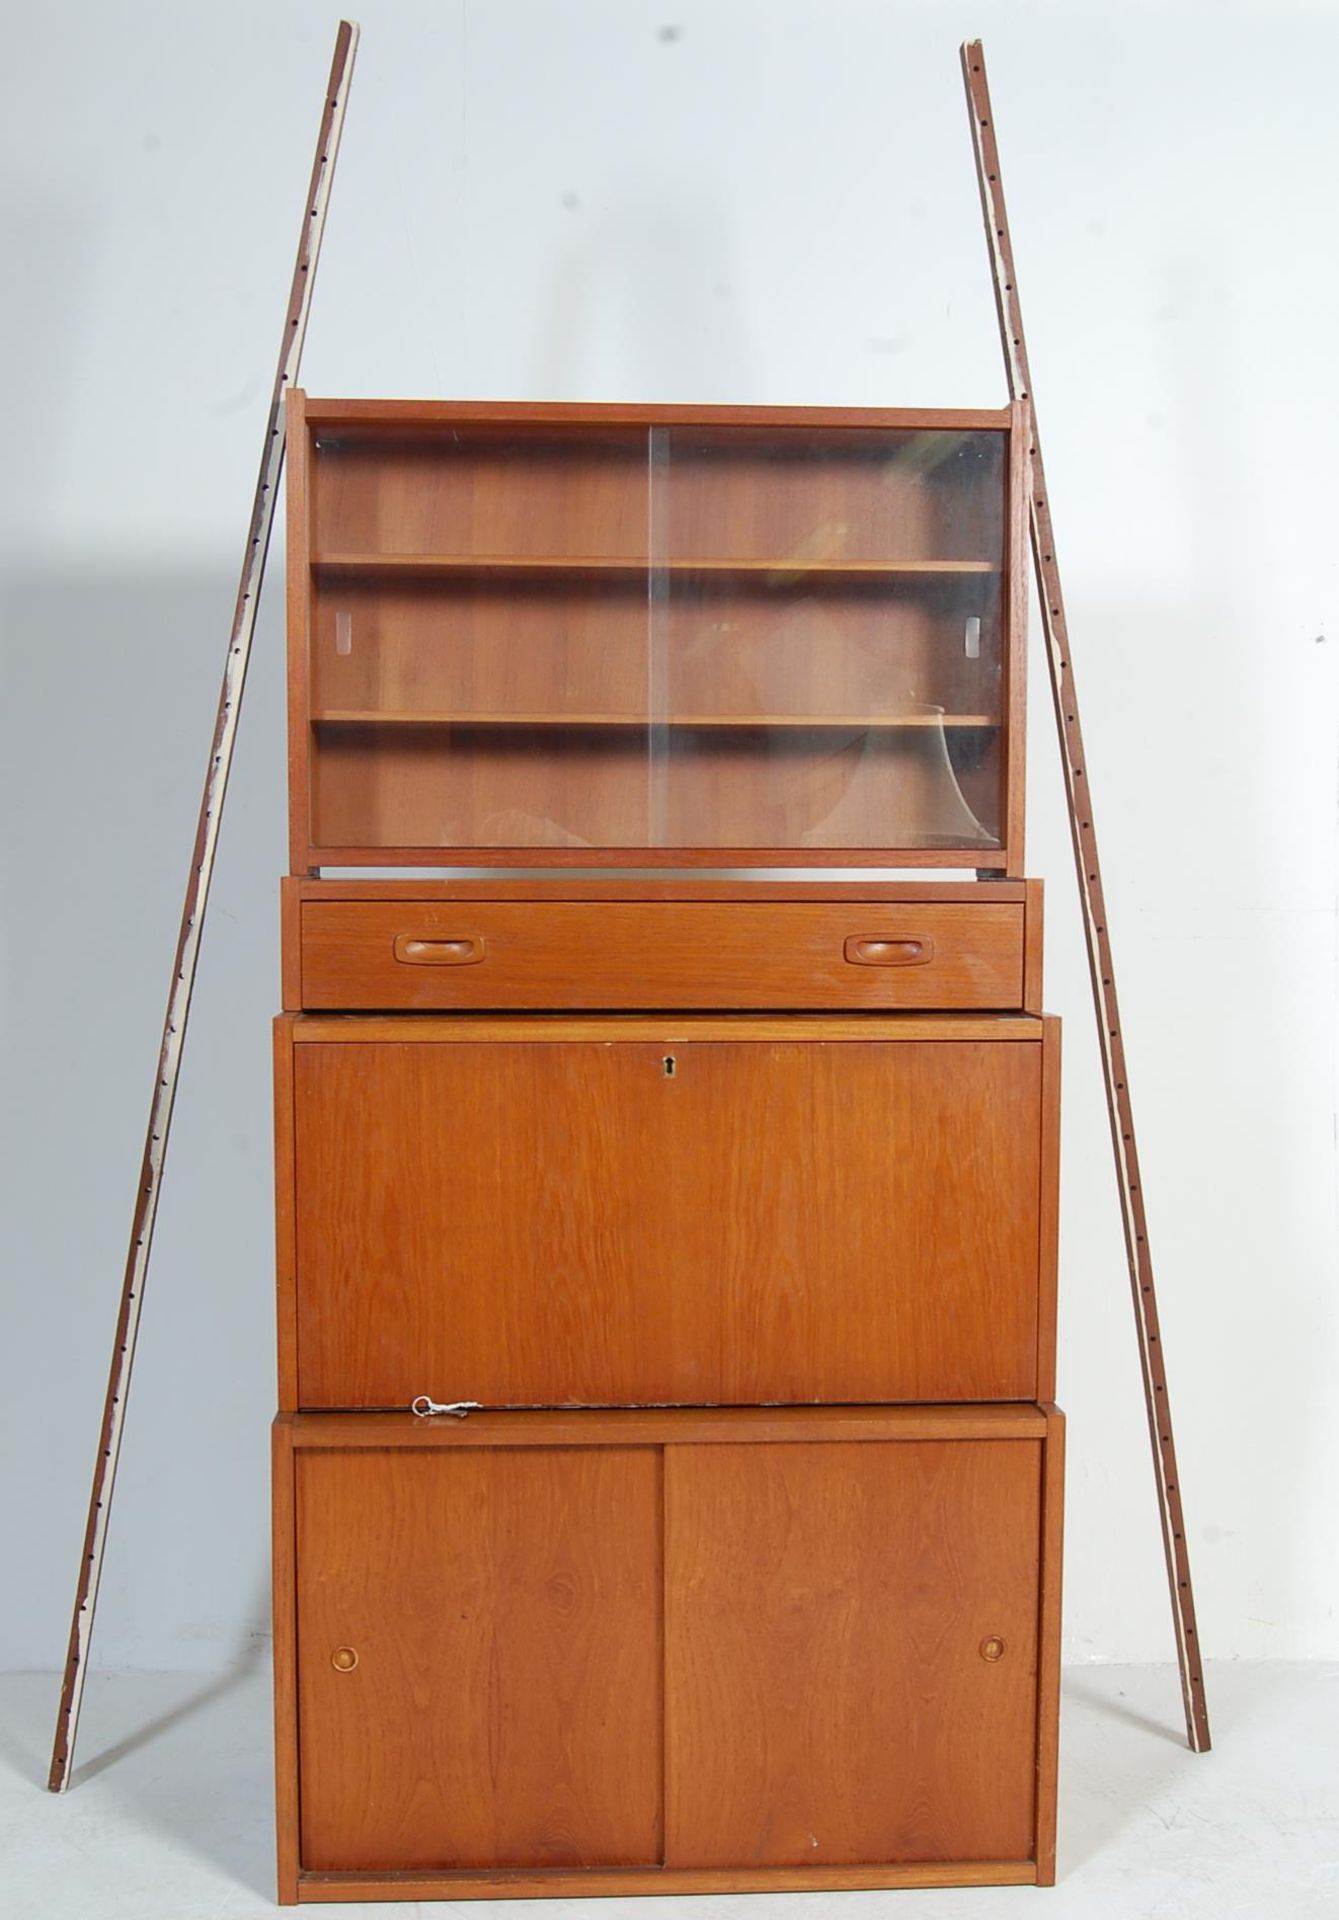 RETRO VINTAGE 1970S DANISH MODULAR LADDERAX STYLE SYSTEM BY PS SYSTEMS